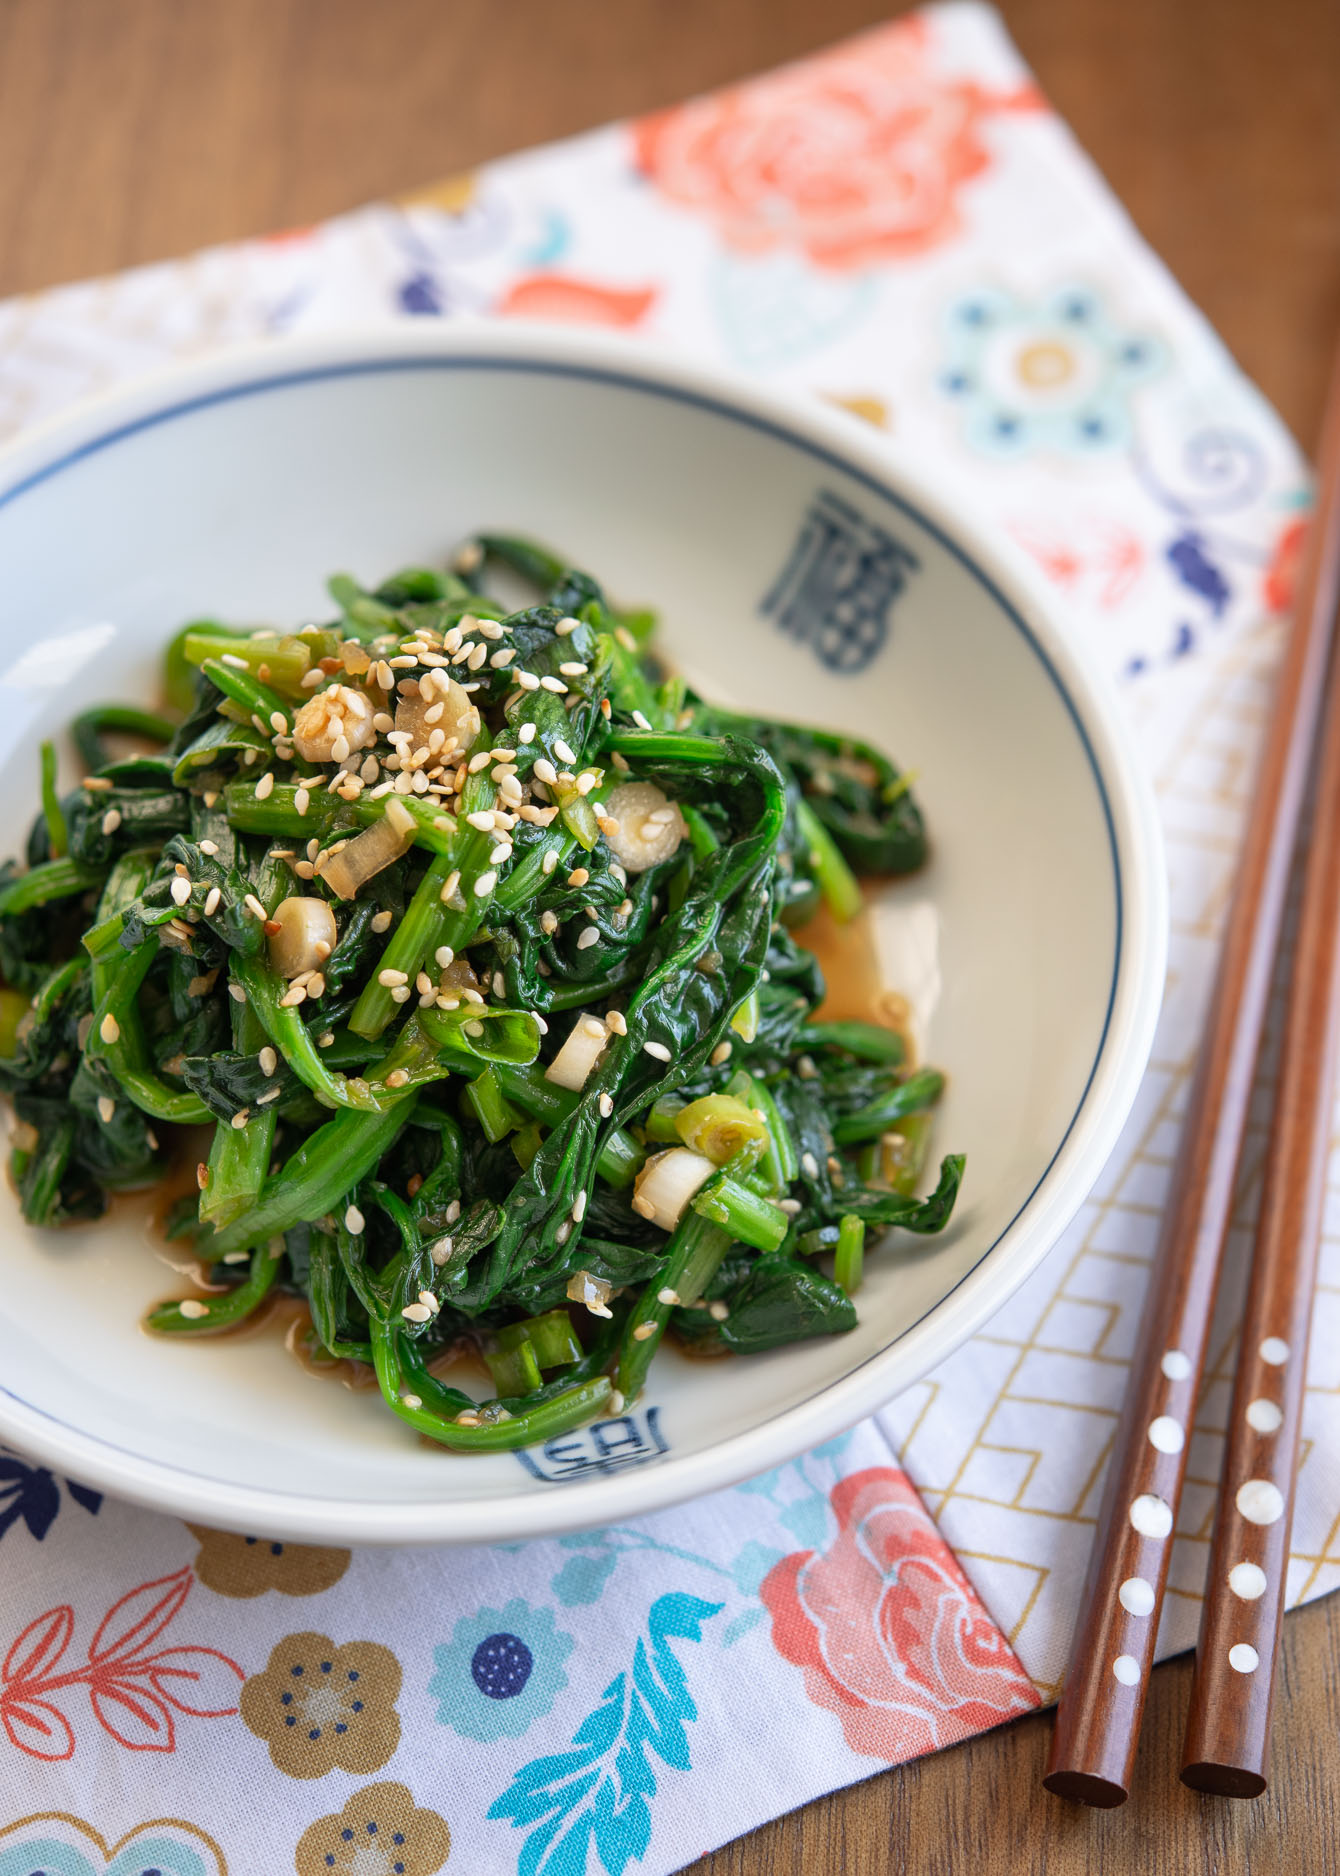 Korean spinach (spinach banchan) made with Korean soy sauce.